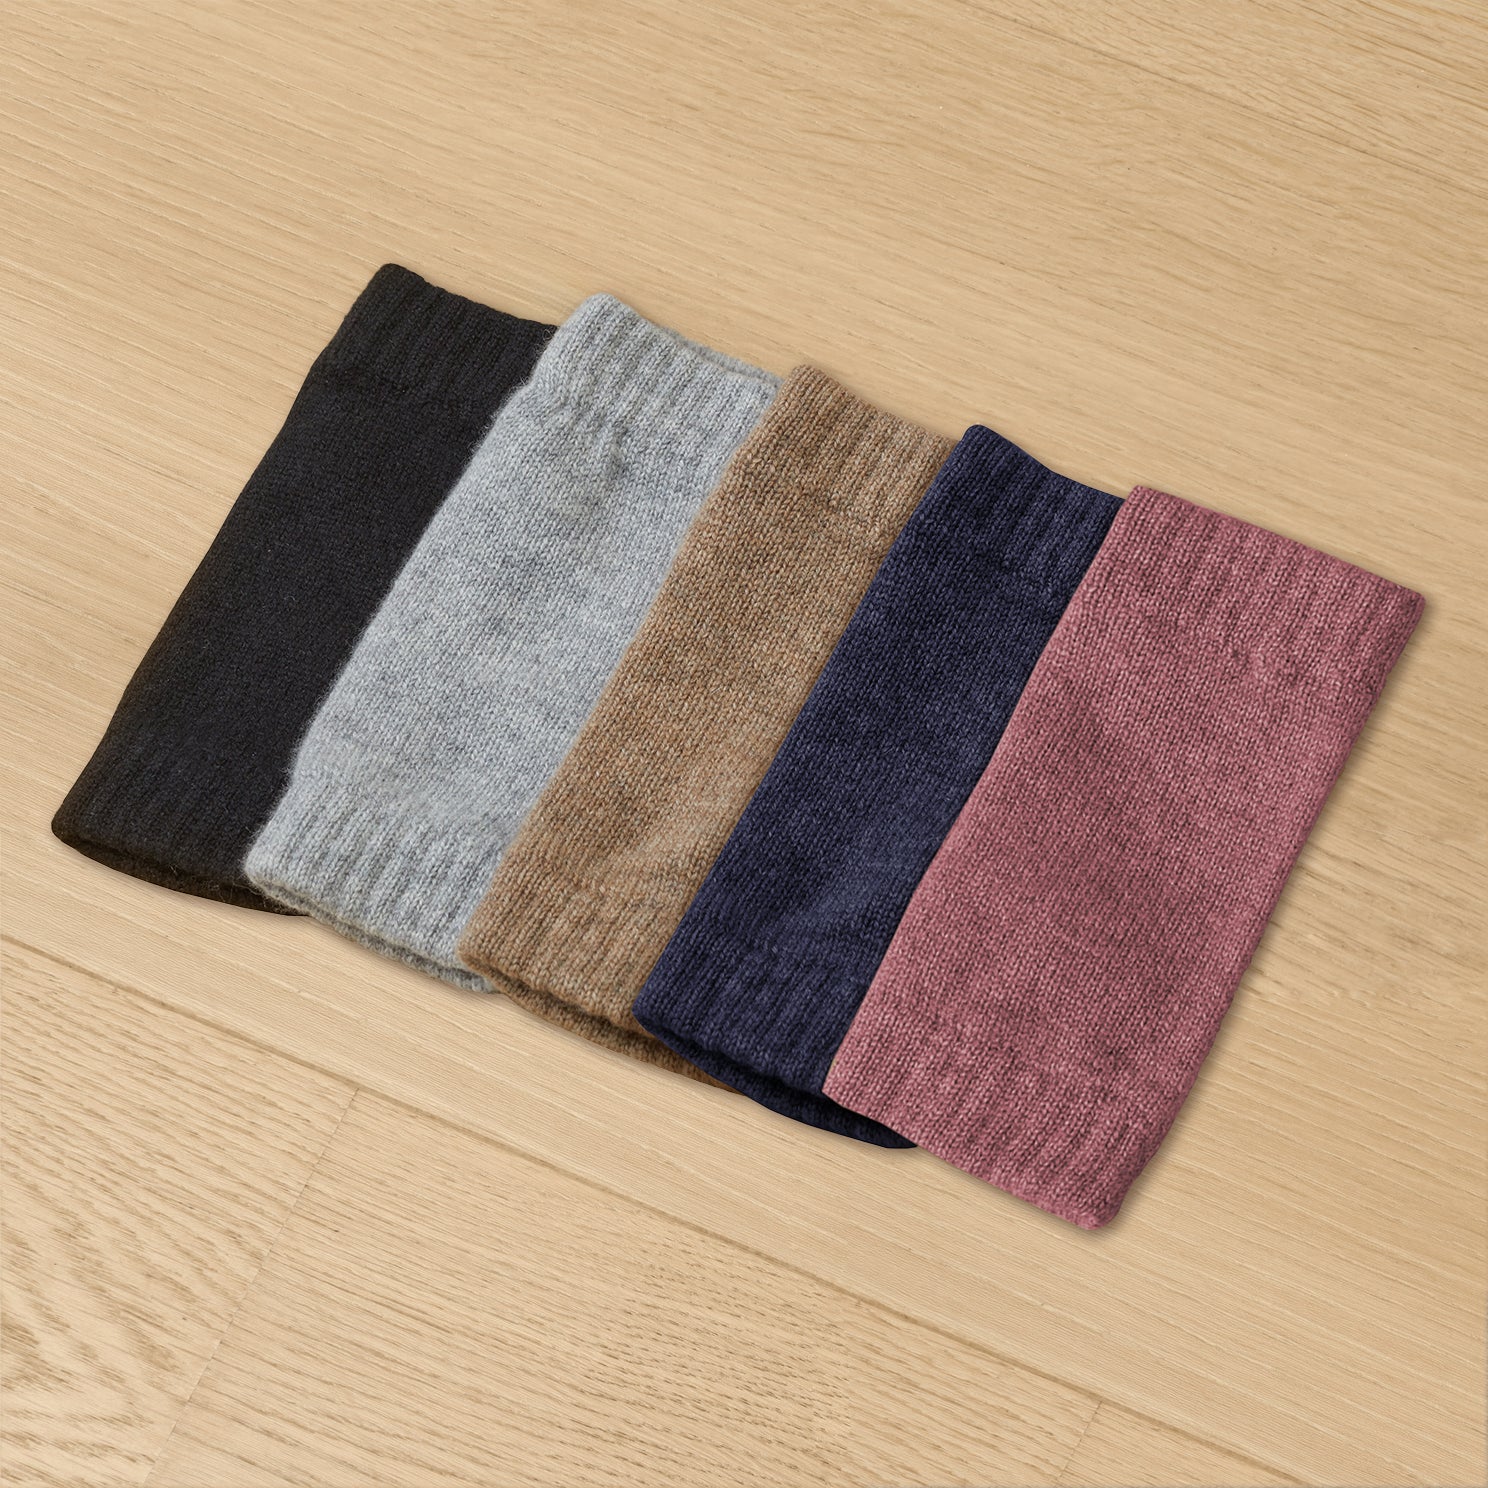 Five cashmere wrist warmers in colors black, grey, mocha, midnight blue, and mauve